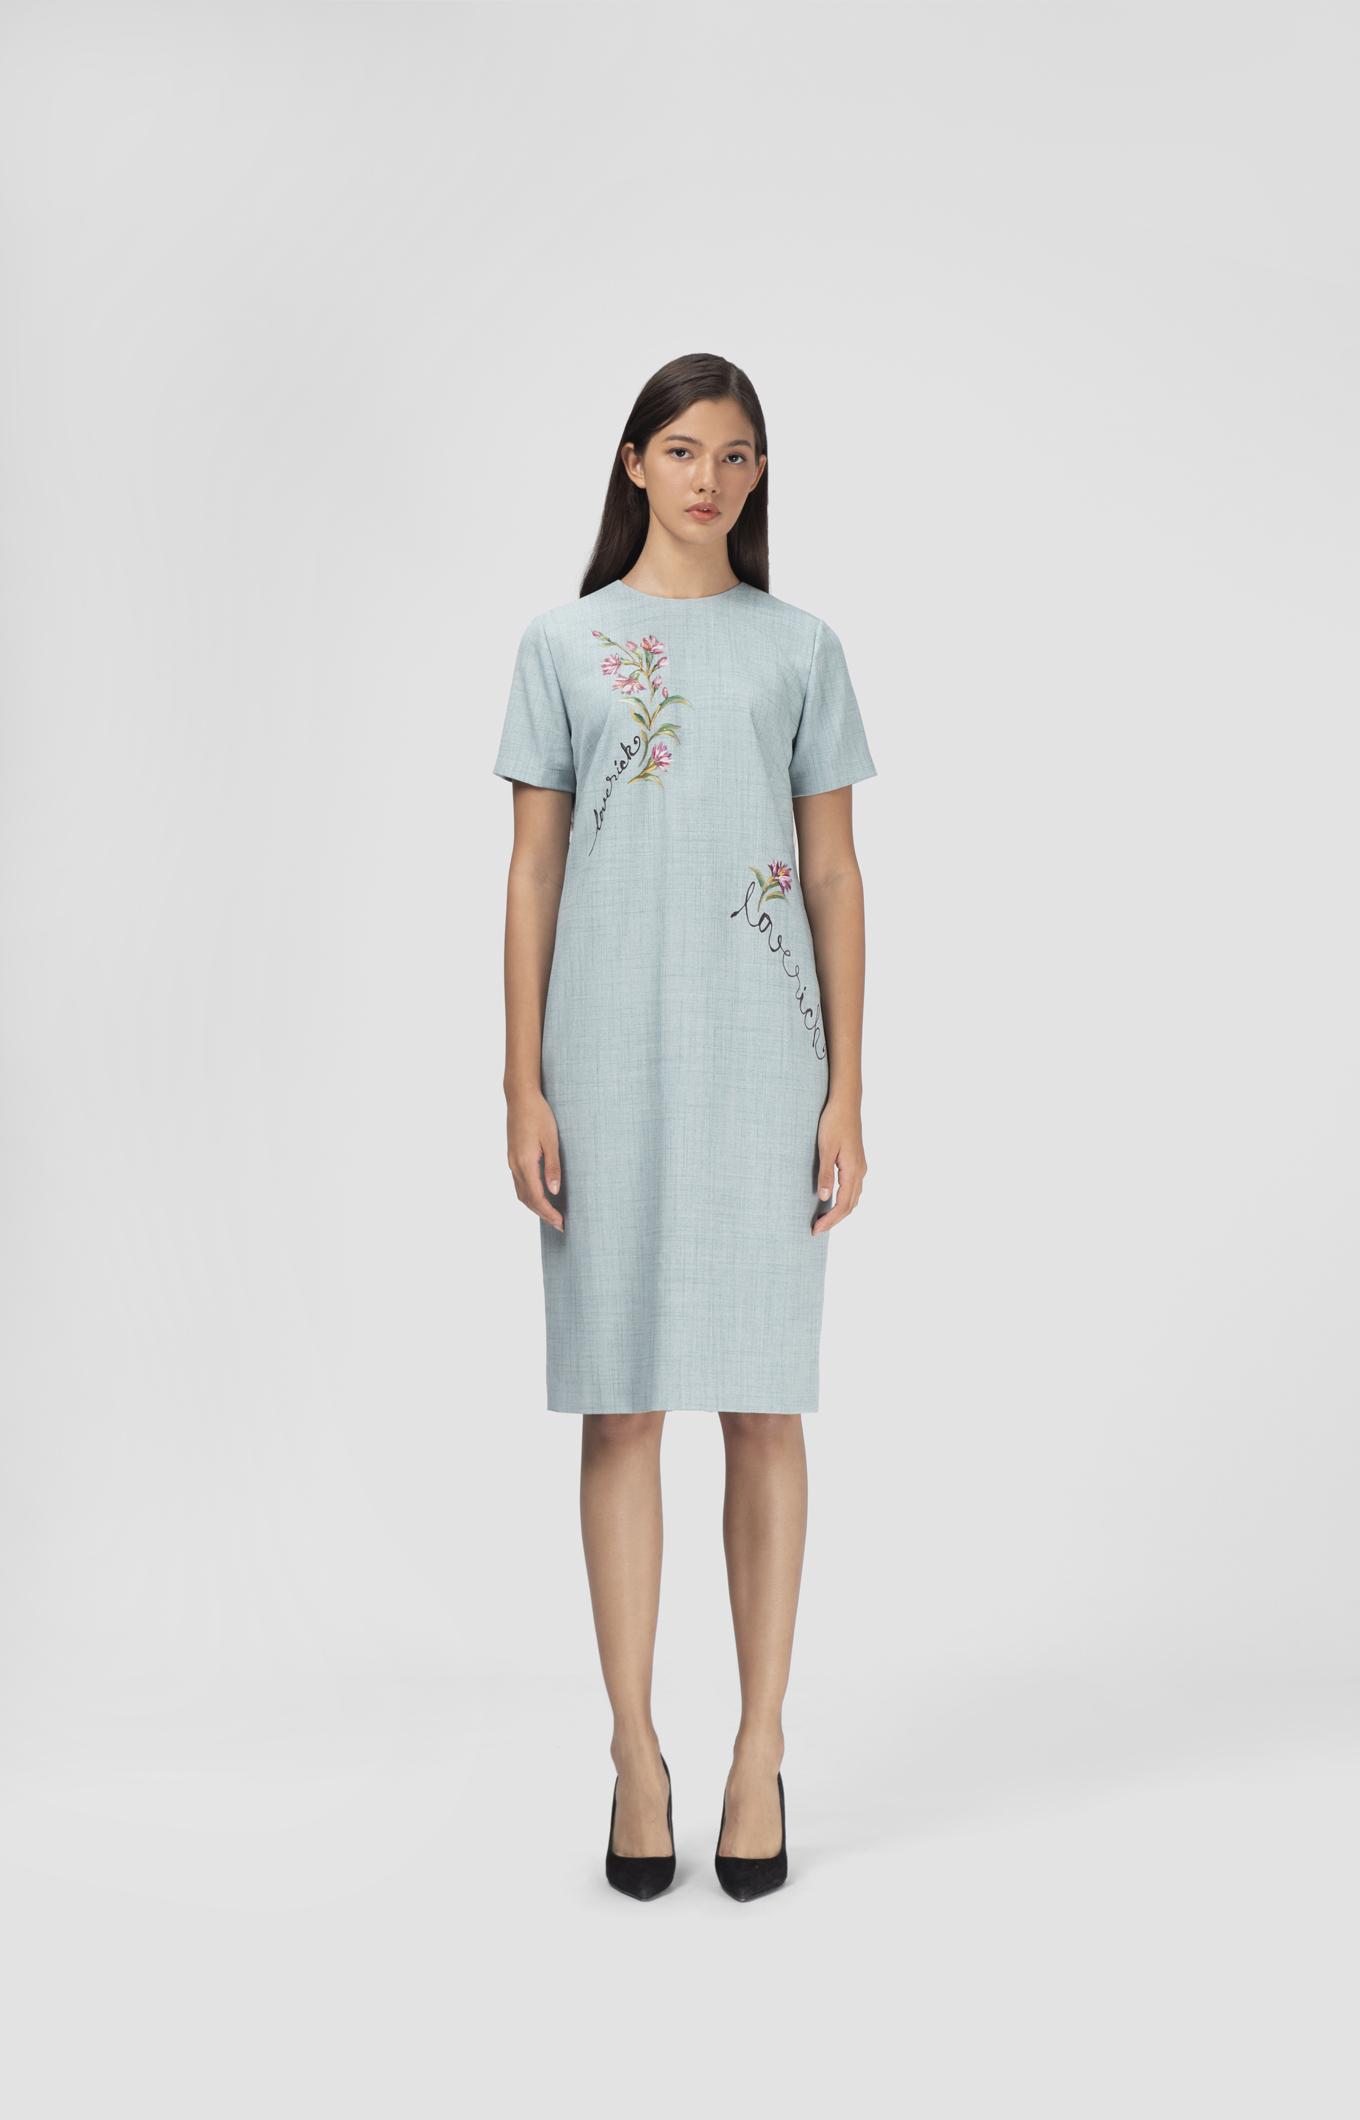 EMBROIDERED SOFT BLUE DRESS